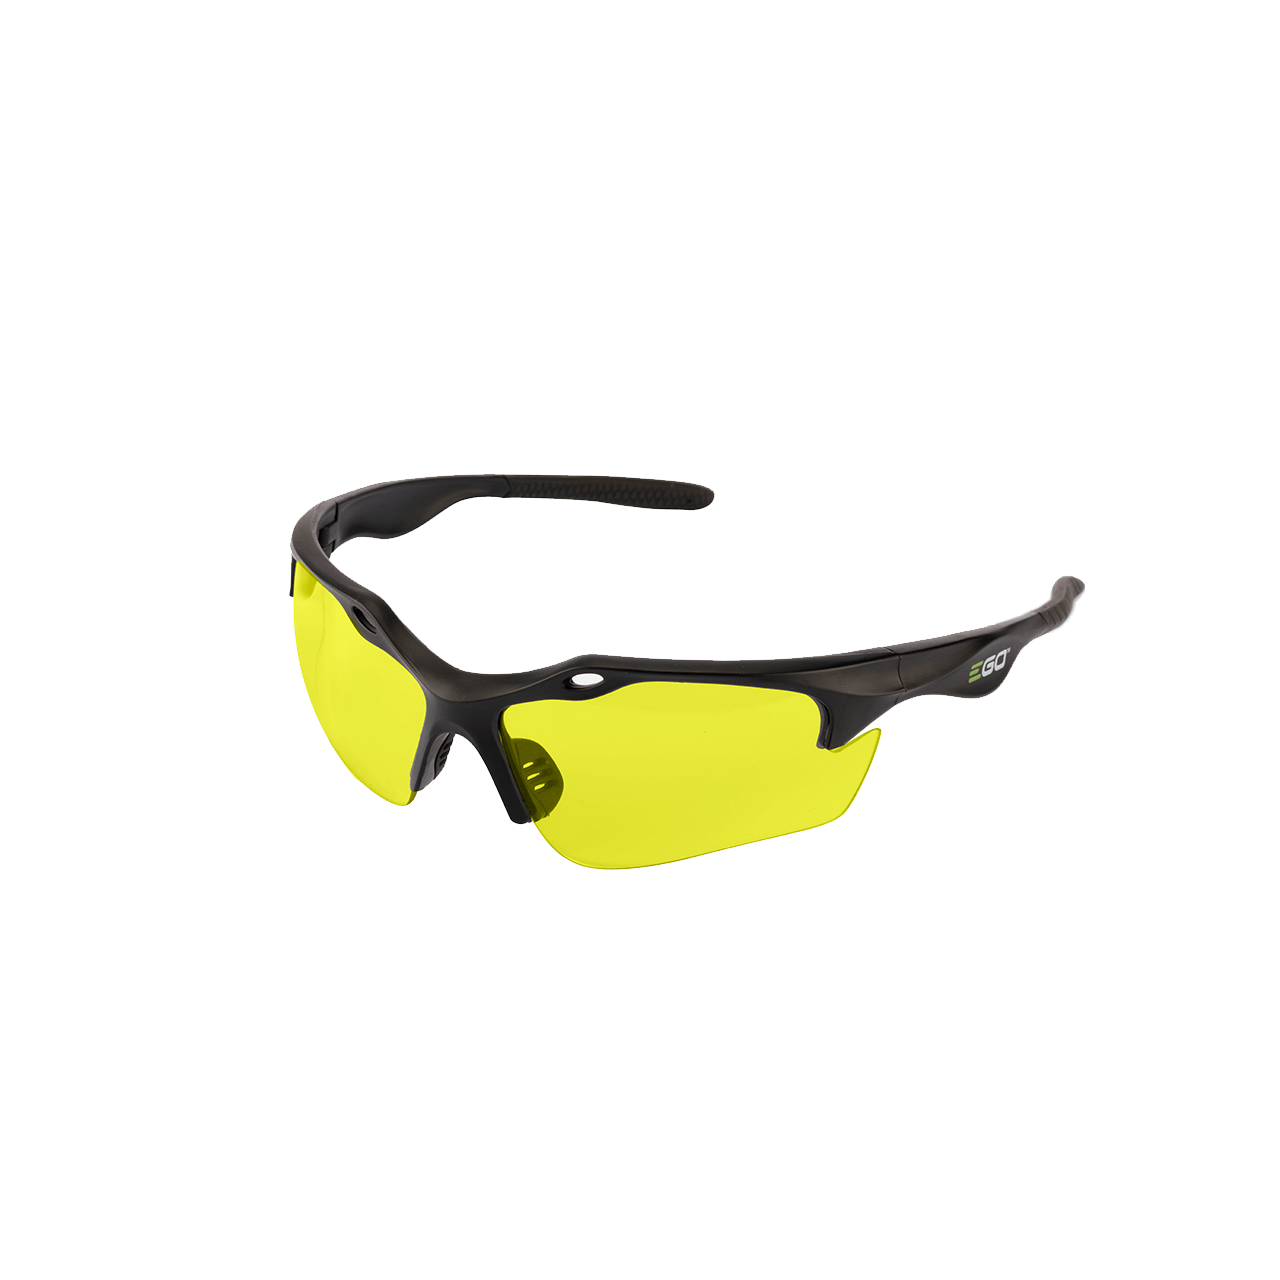 EGO GS003 SAFETY GLASSES - YELLOW